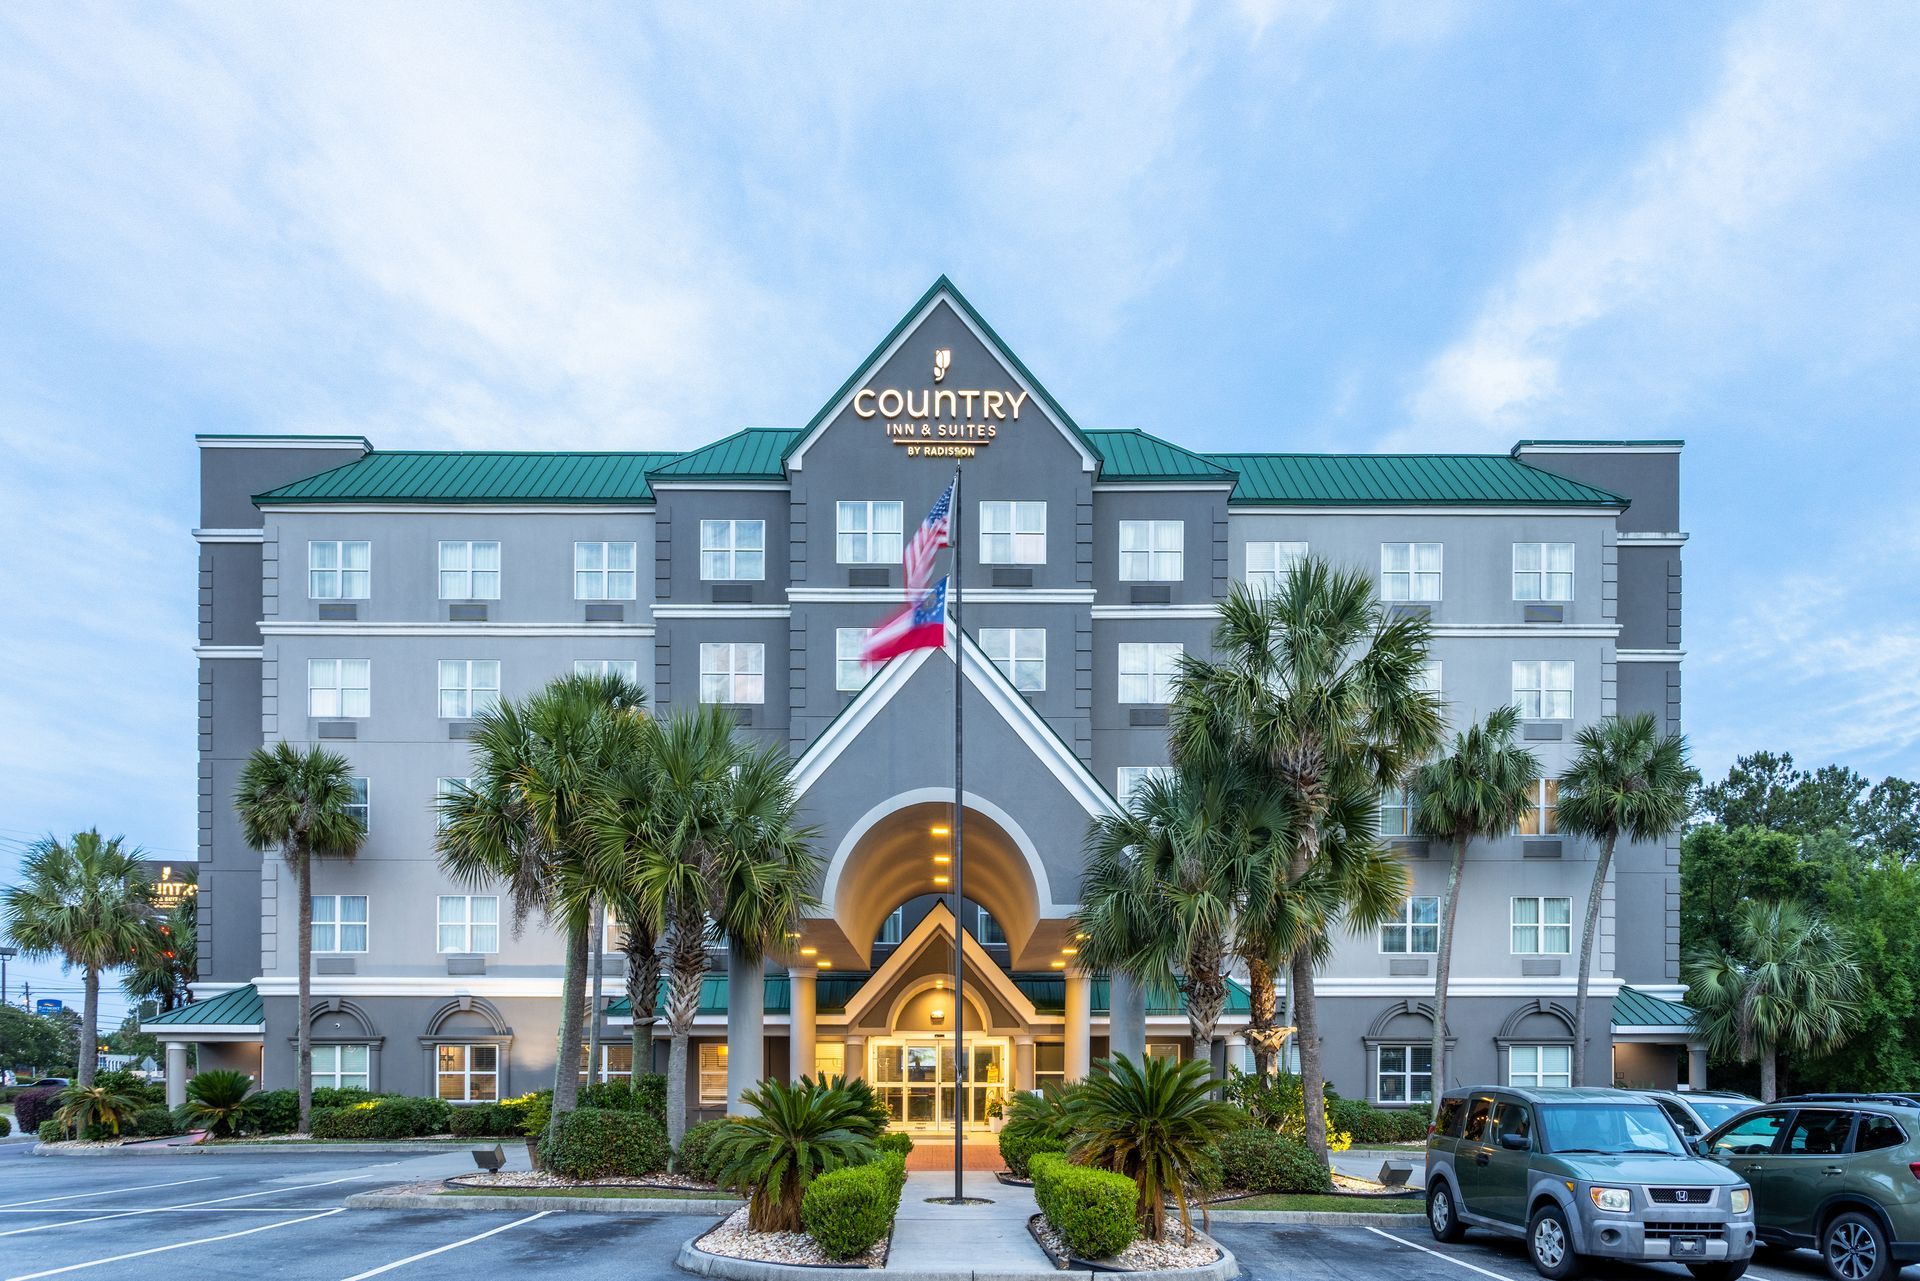 Exterior with palm trees of Country Inn and Suites in Valdosta, GA.